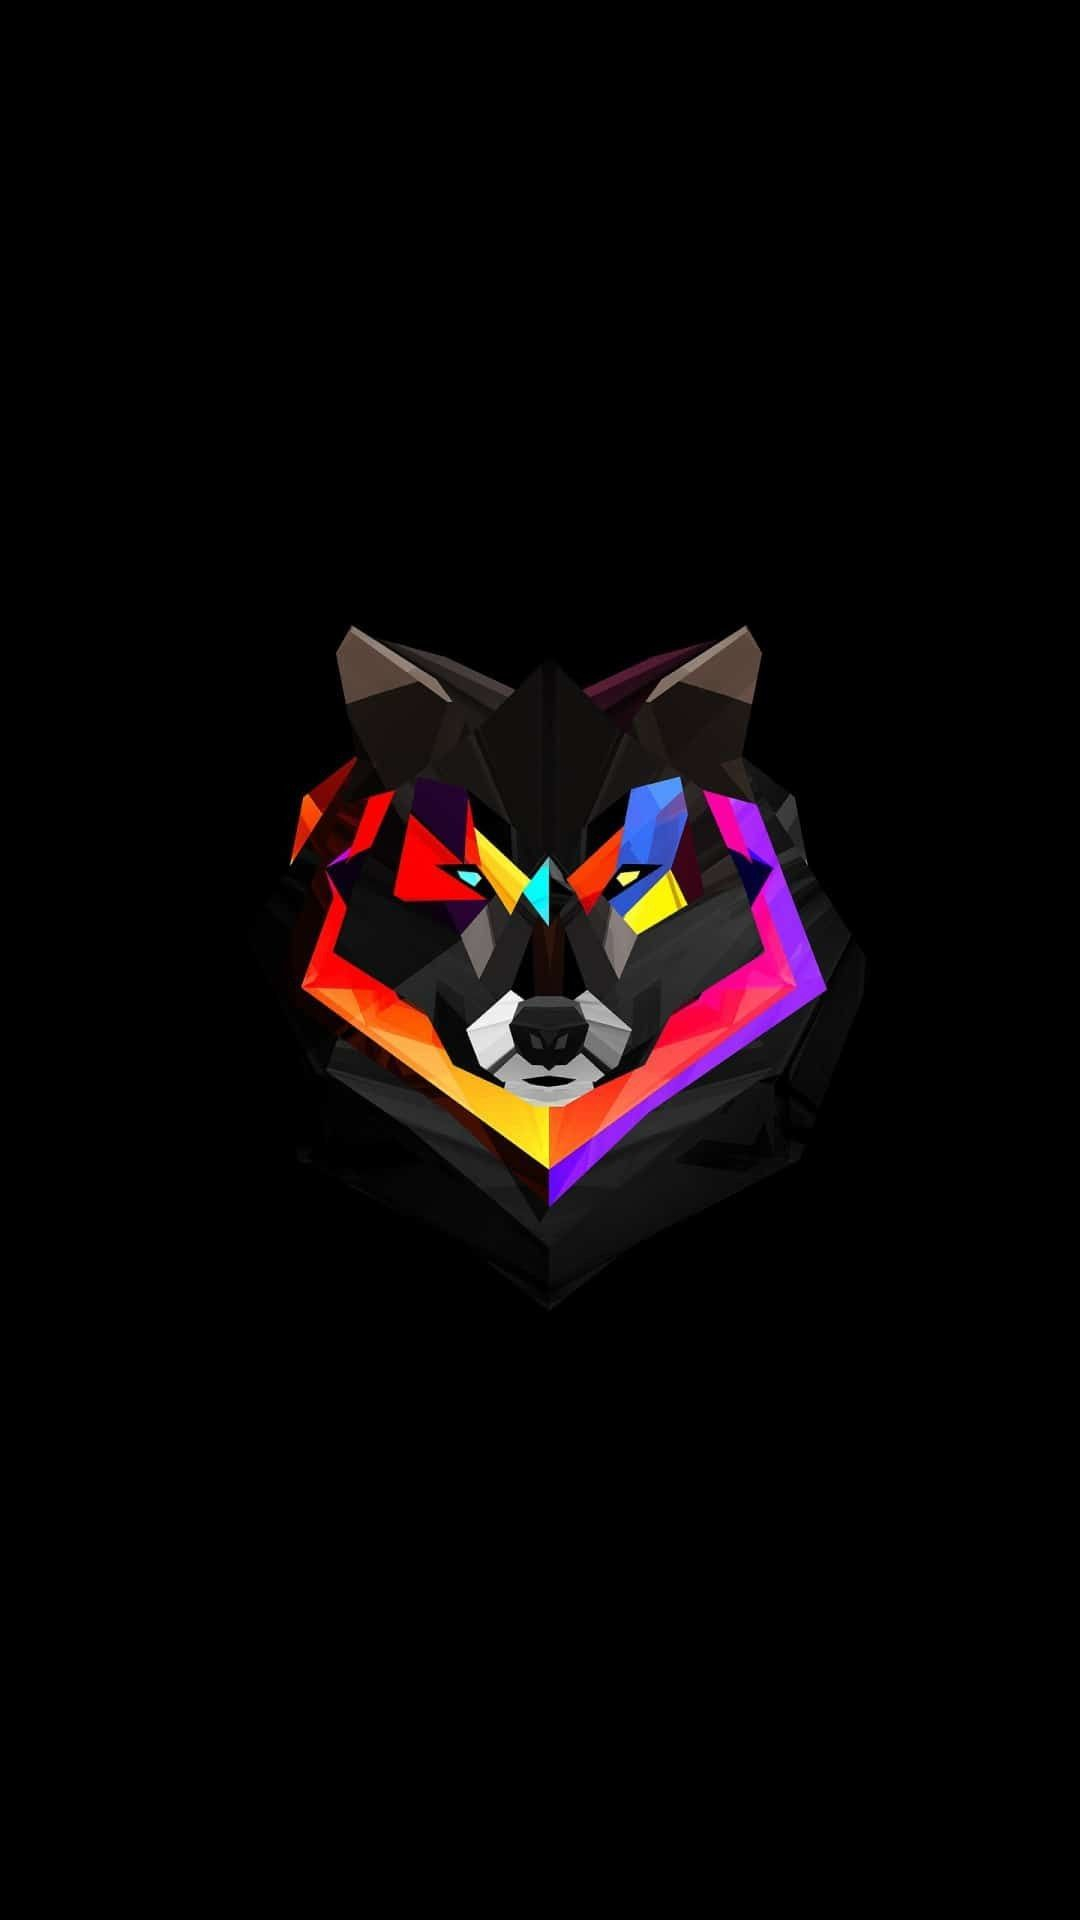 1080x1920 Geometric Wolf Wallpapers Top Free Geometric Wolf Backgrounds